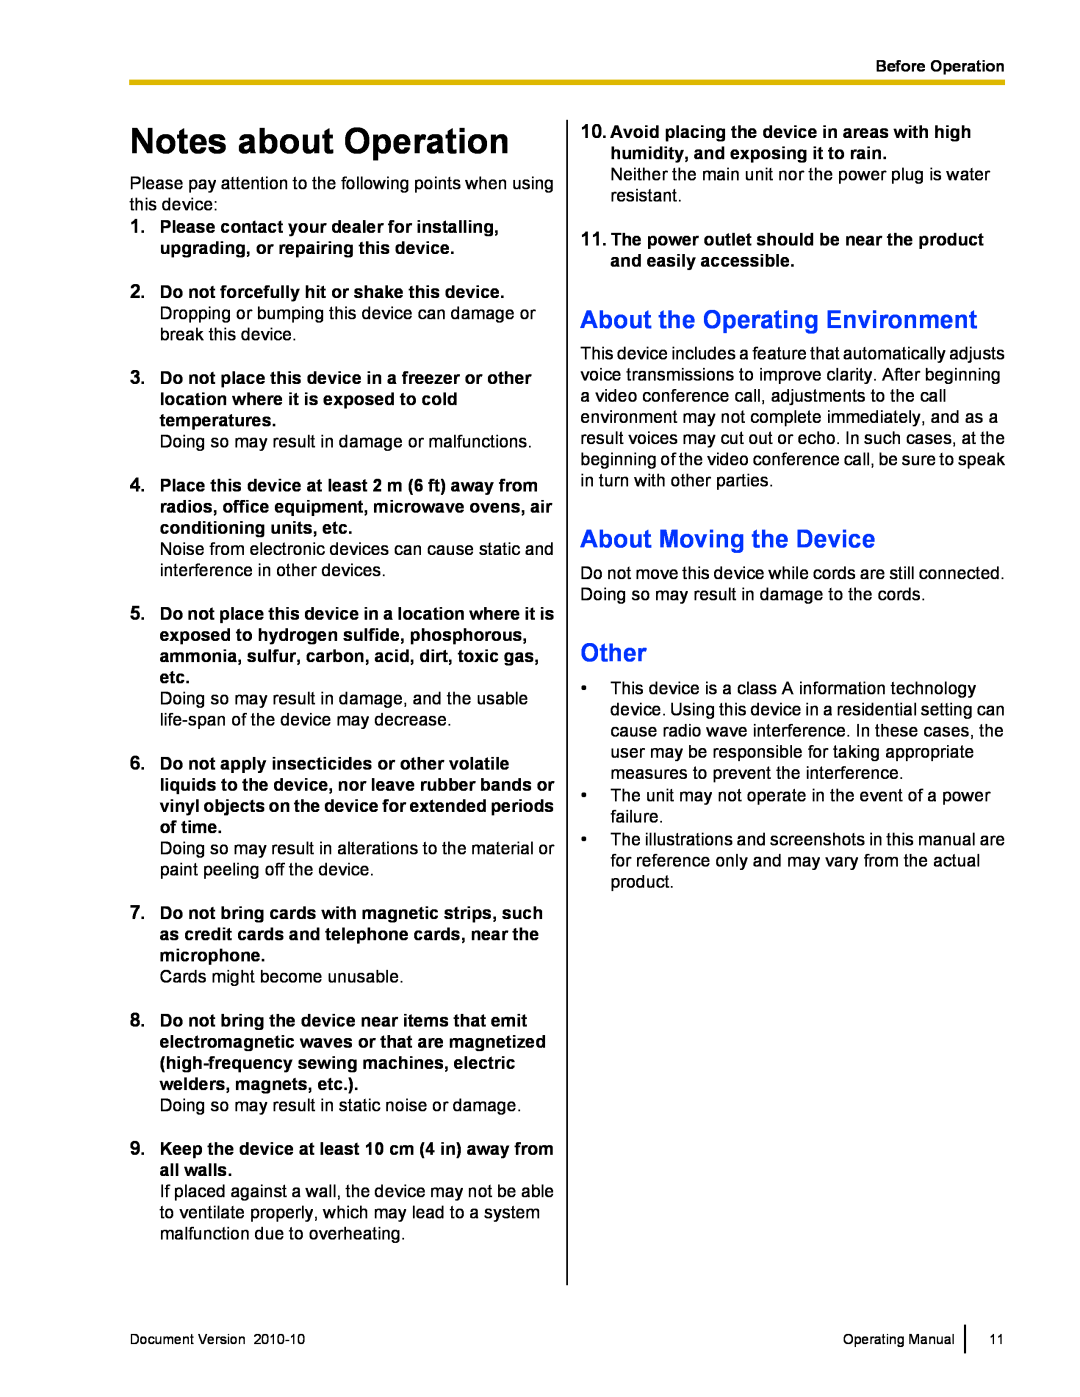 Panasonic KX-VC500 manual Notes about Operation, About the Operating Environment, About Moving the Device, Other 